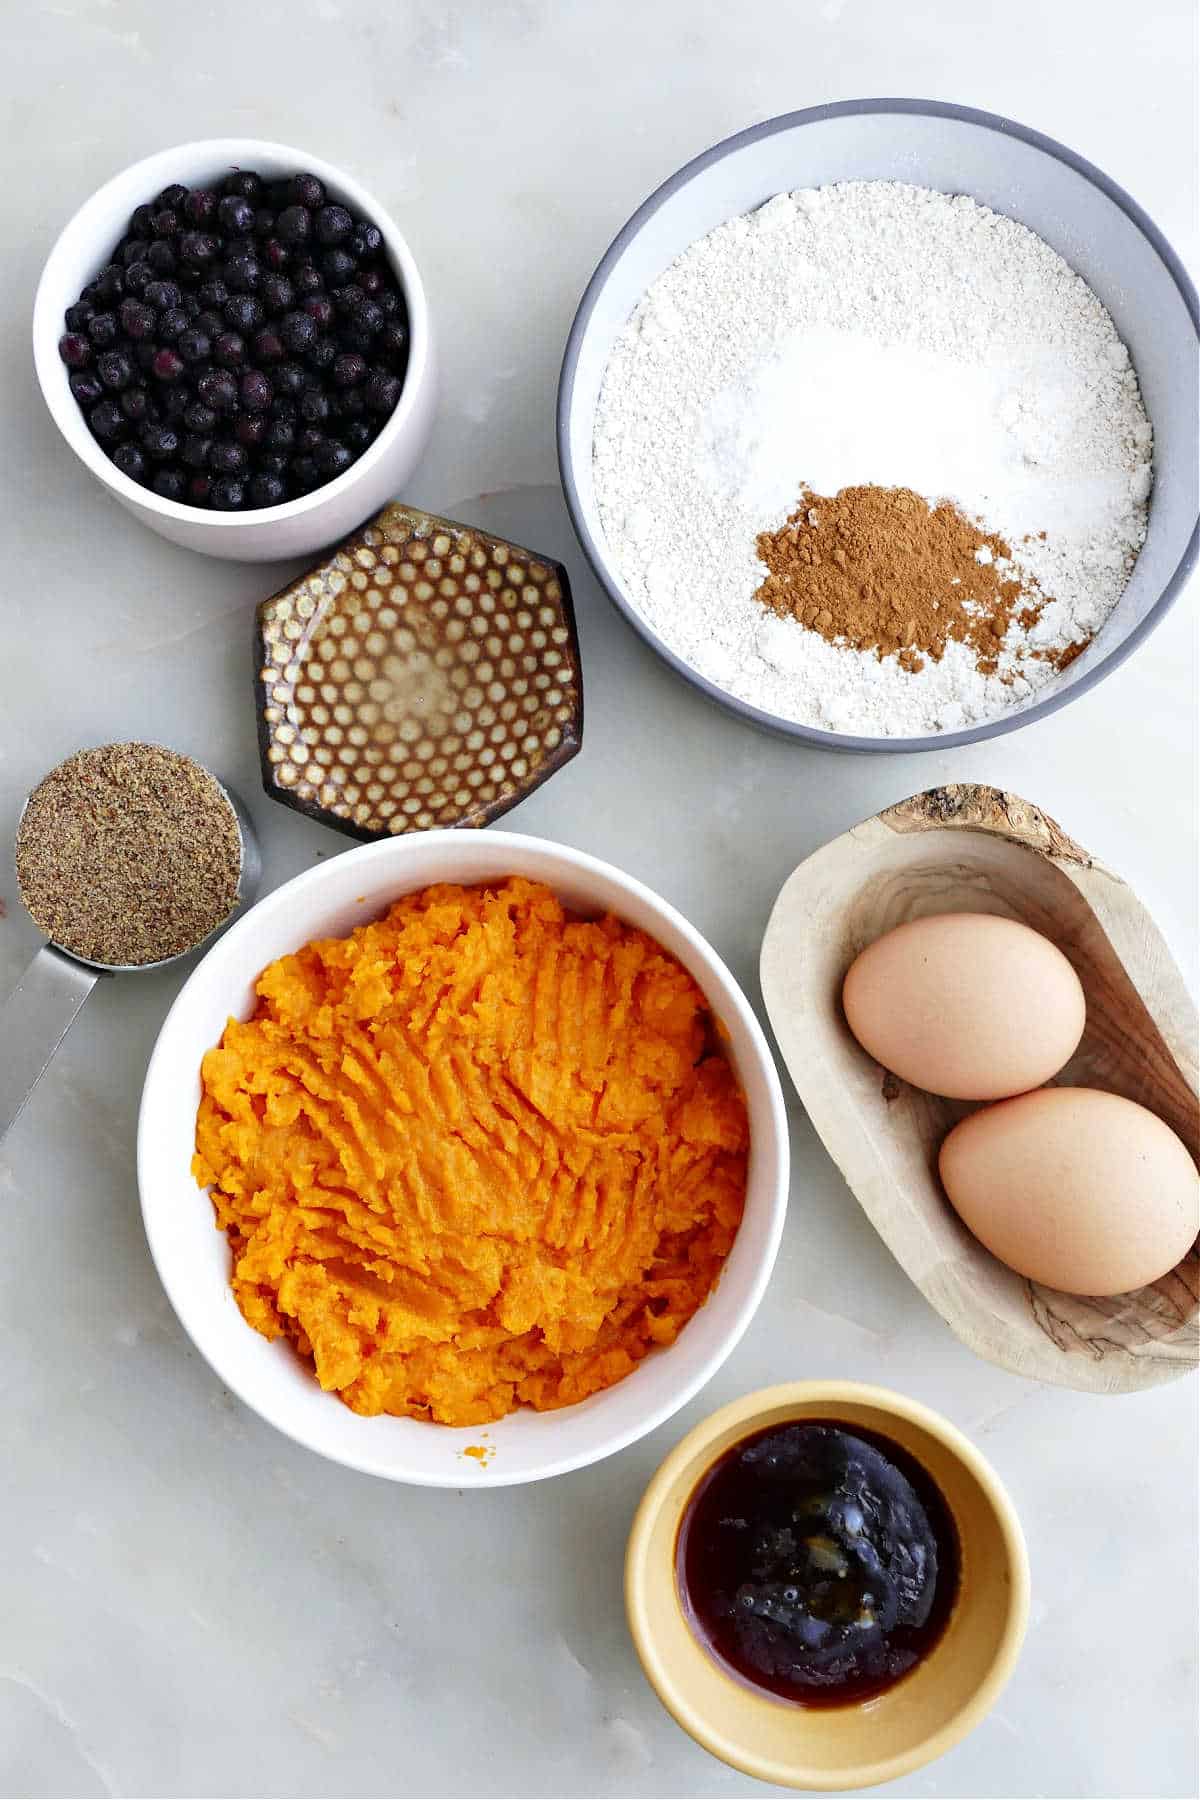 Mashed sweet potato, flaxseed, oats, eggs, and other ingredients for muffins.